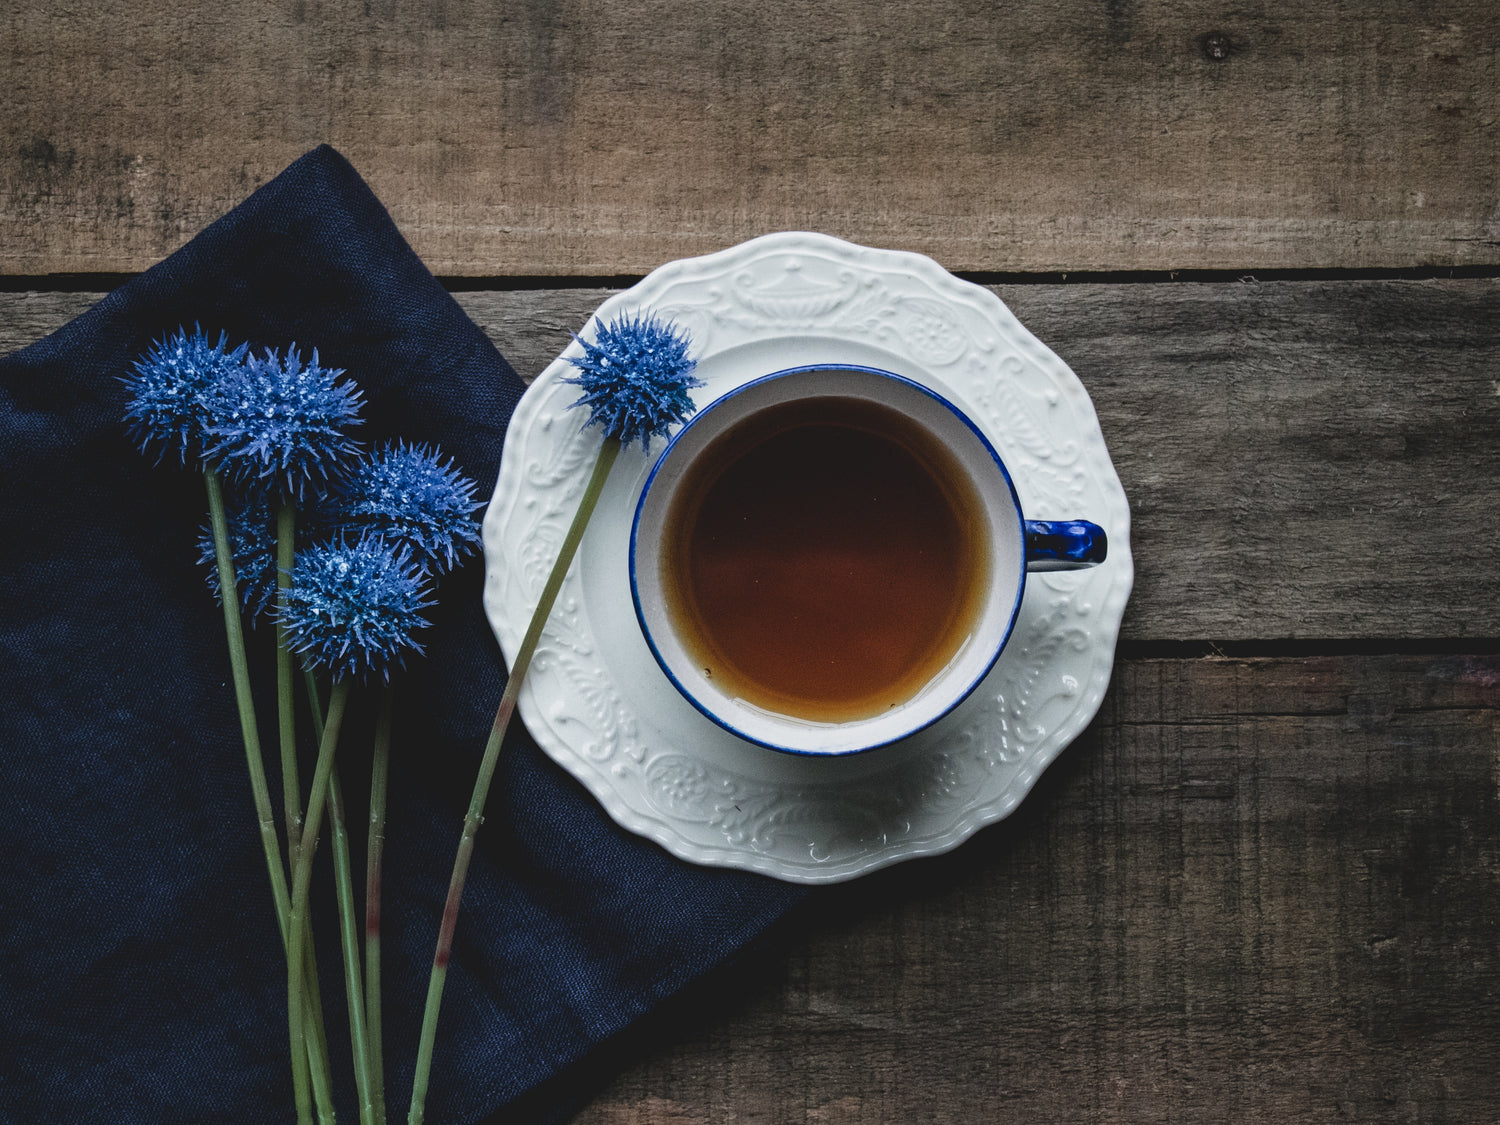 tea cup with blue flowers beside